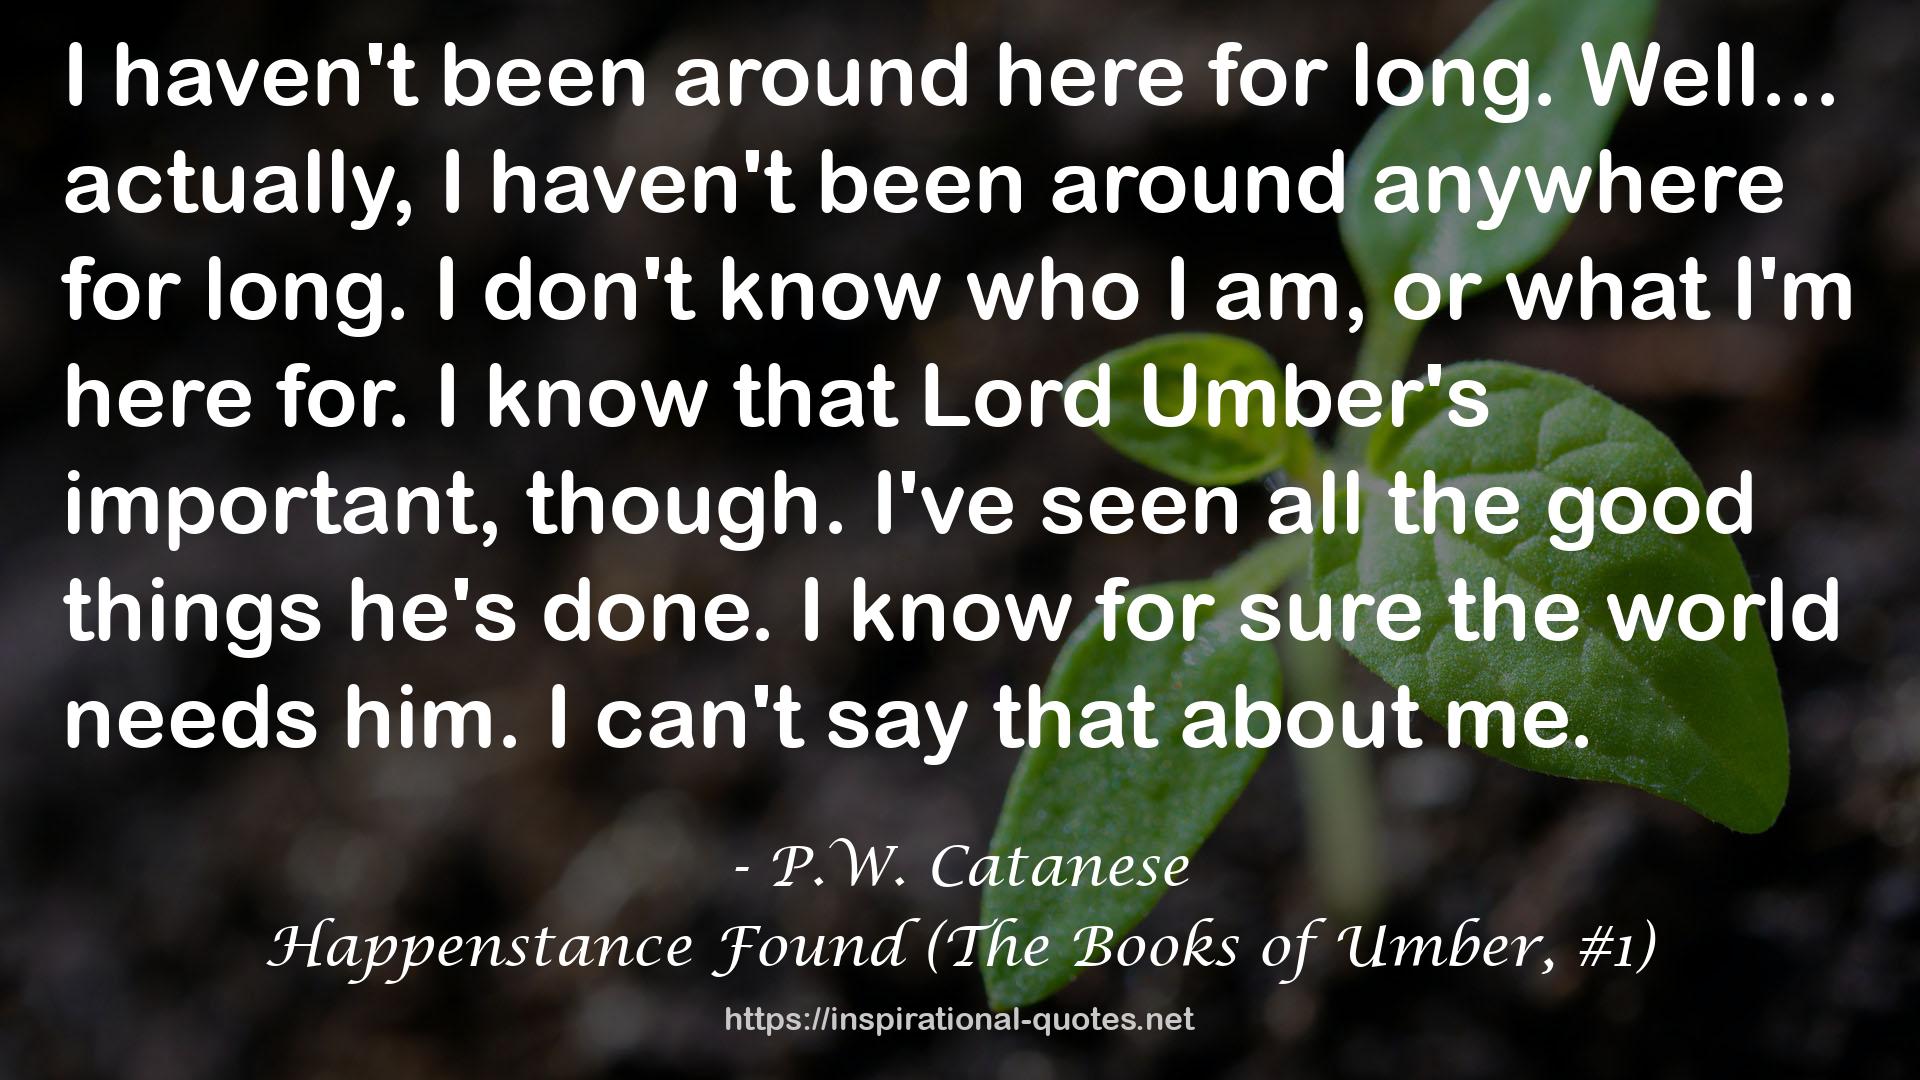 Happenstance Found (The Books of Umber, #1) QUOTES